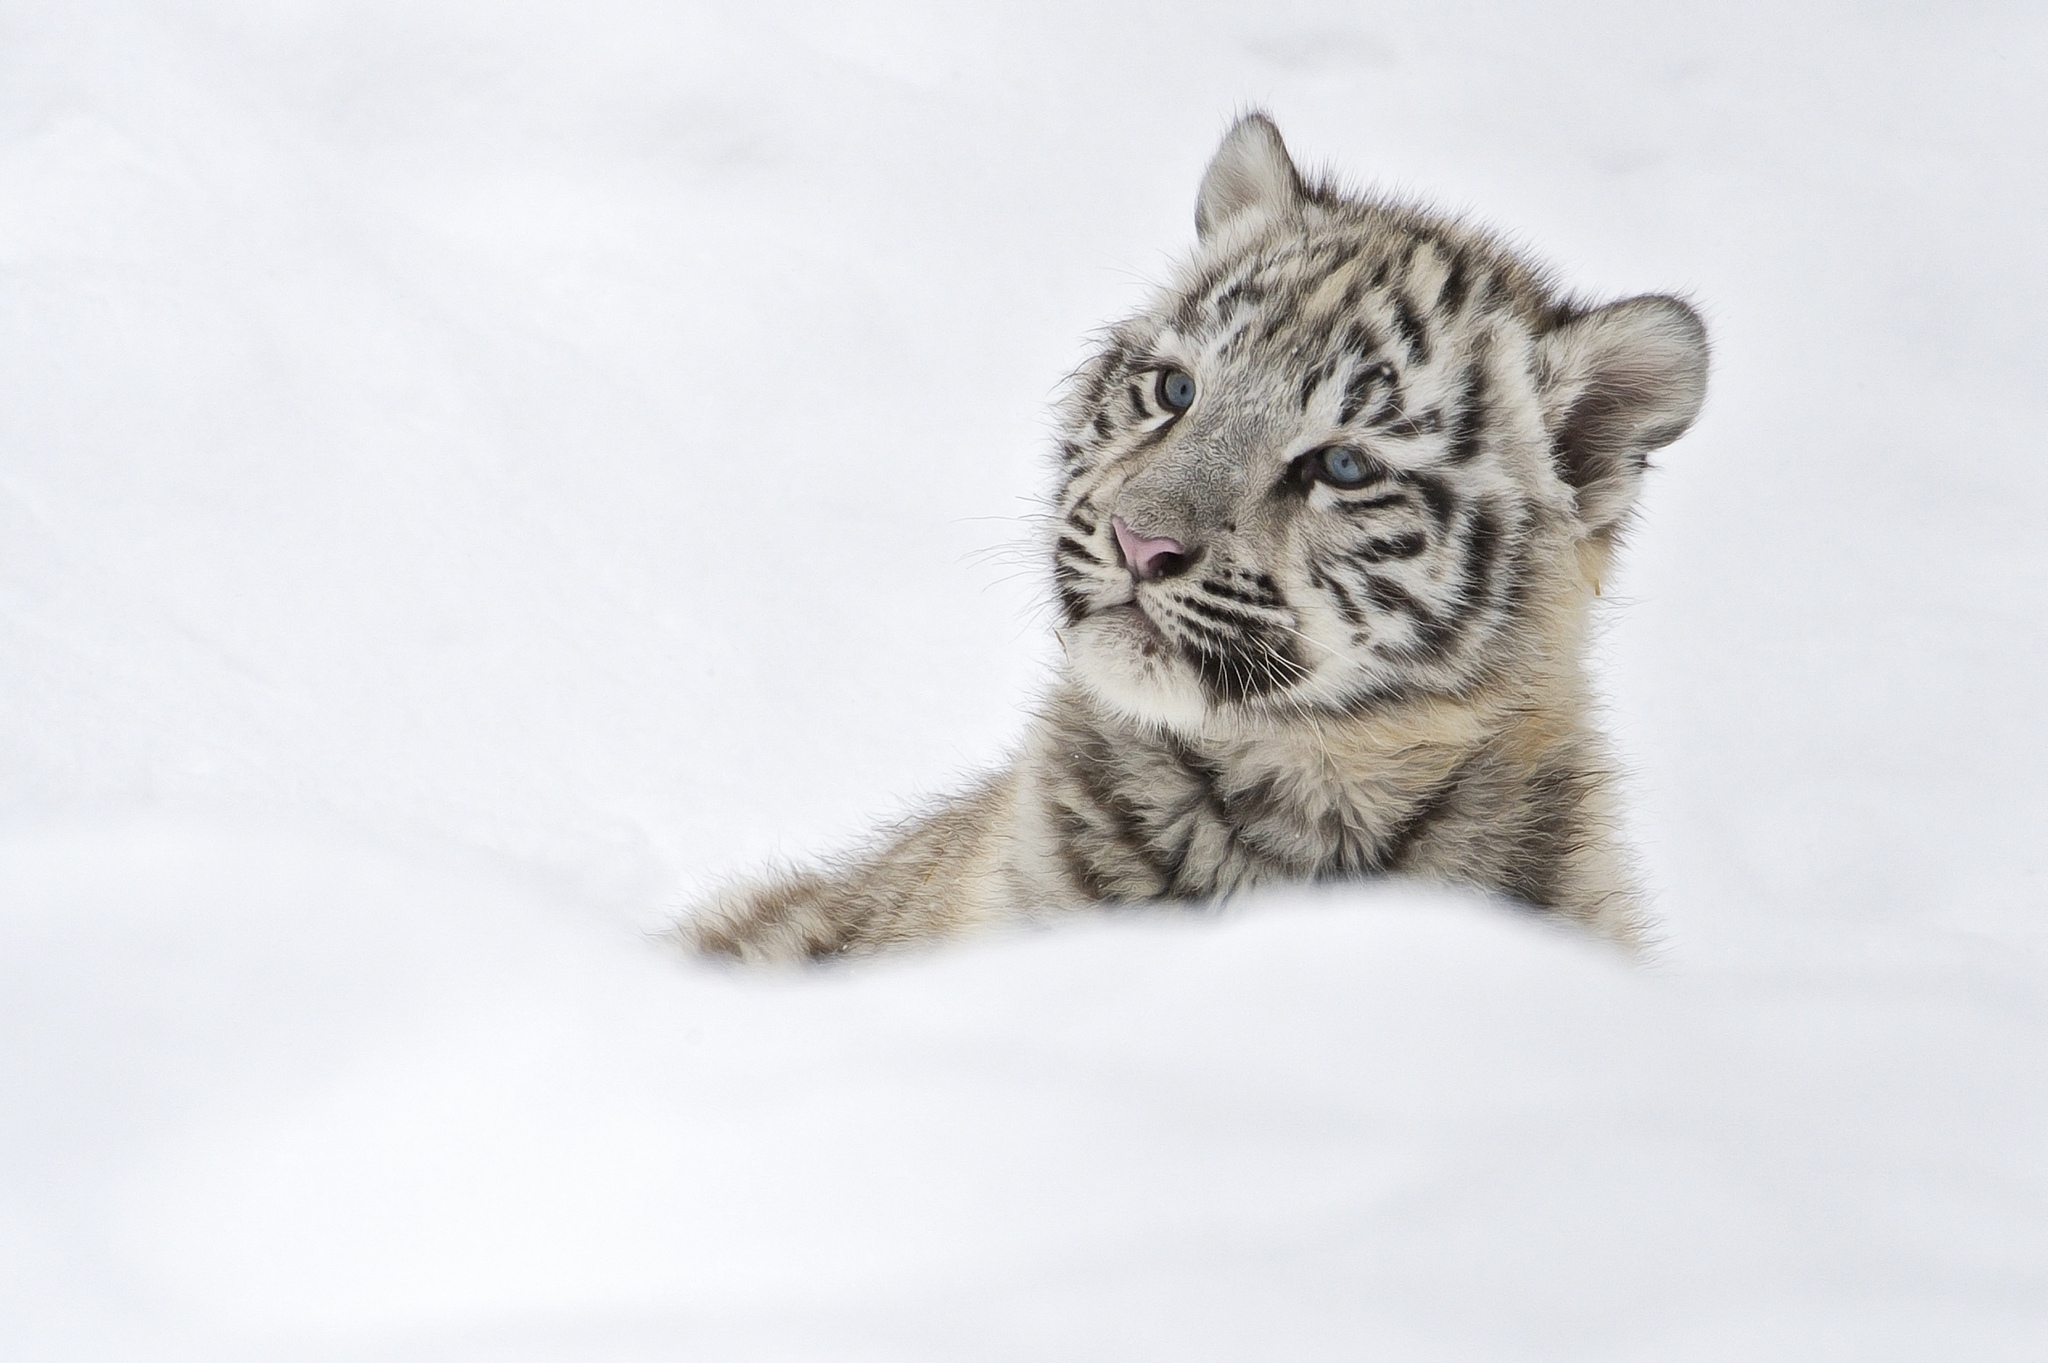 white tiger cubs with blue eyes in snow